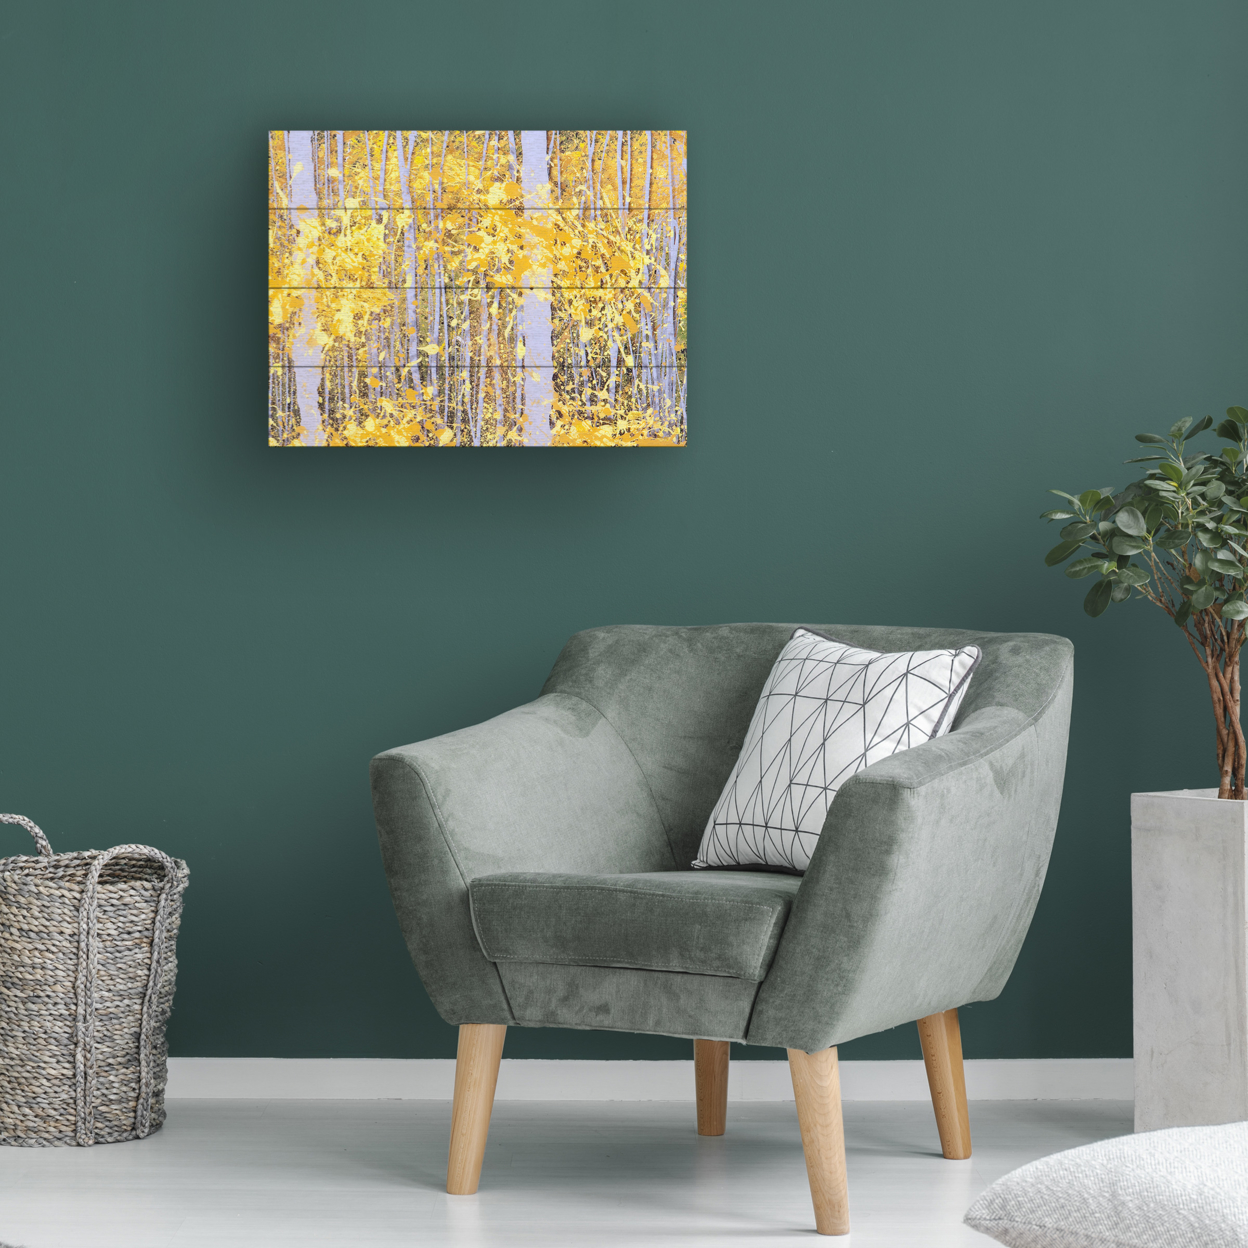 Wall Art 12 X 16 Inches Titled PanorAspens Grey Forest Ready To Hang Printed On Wooden Planks